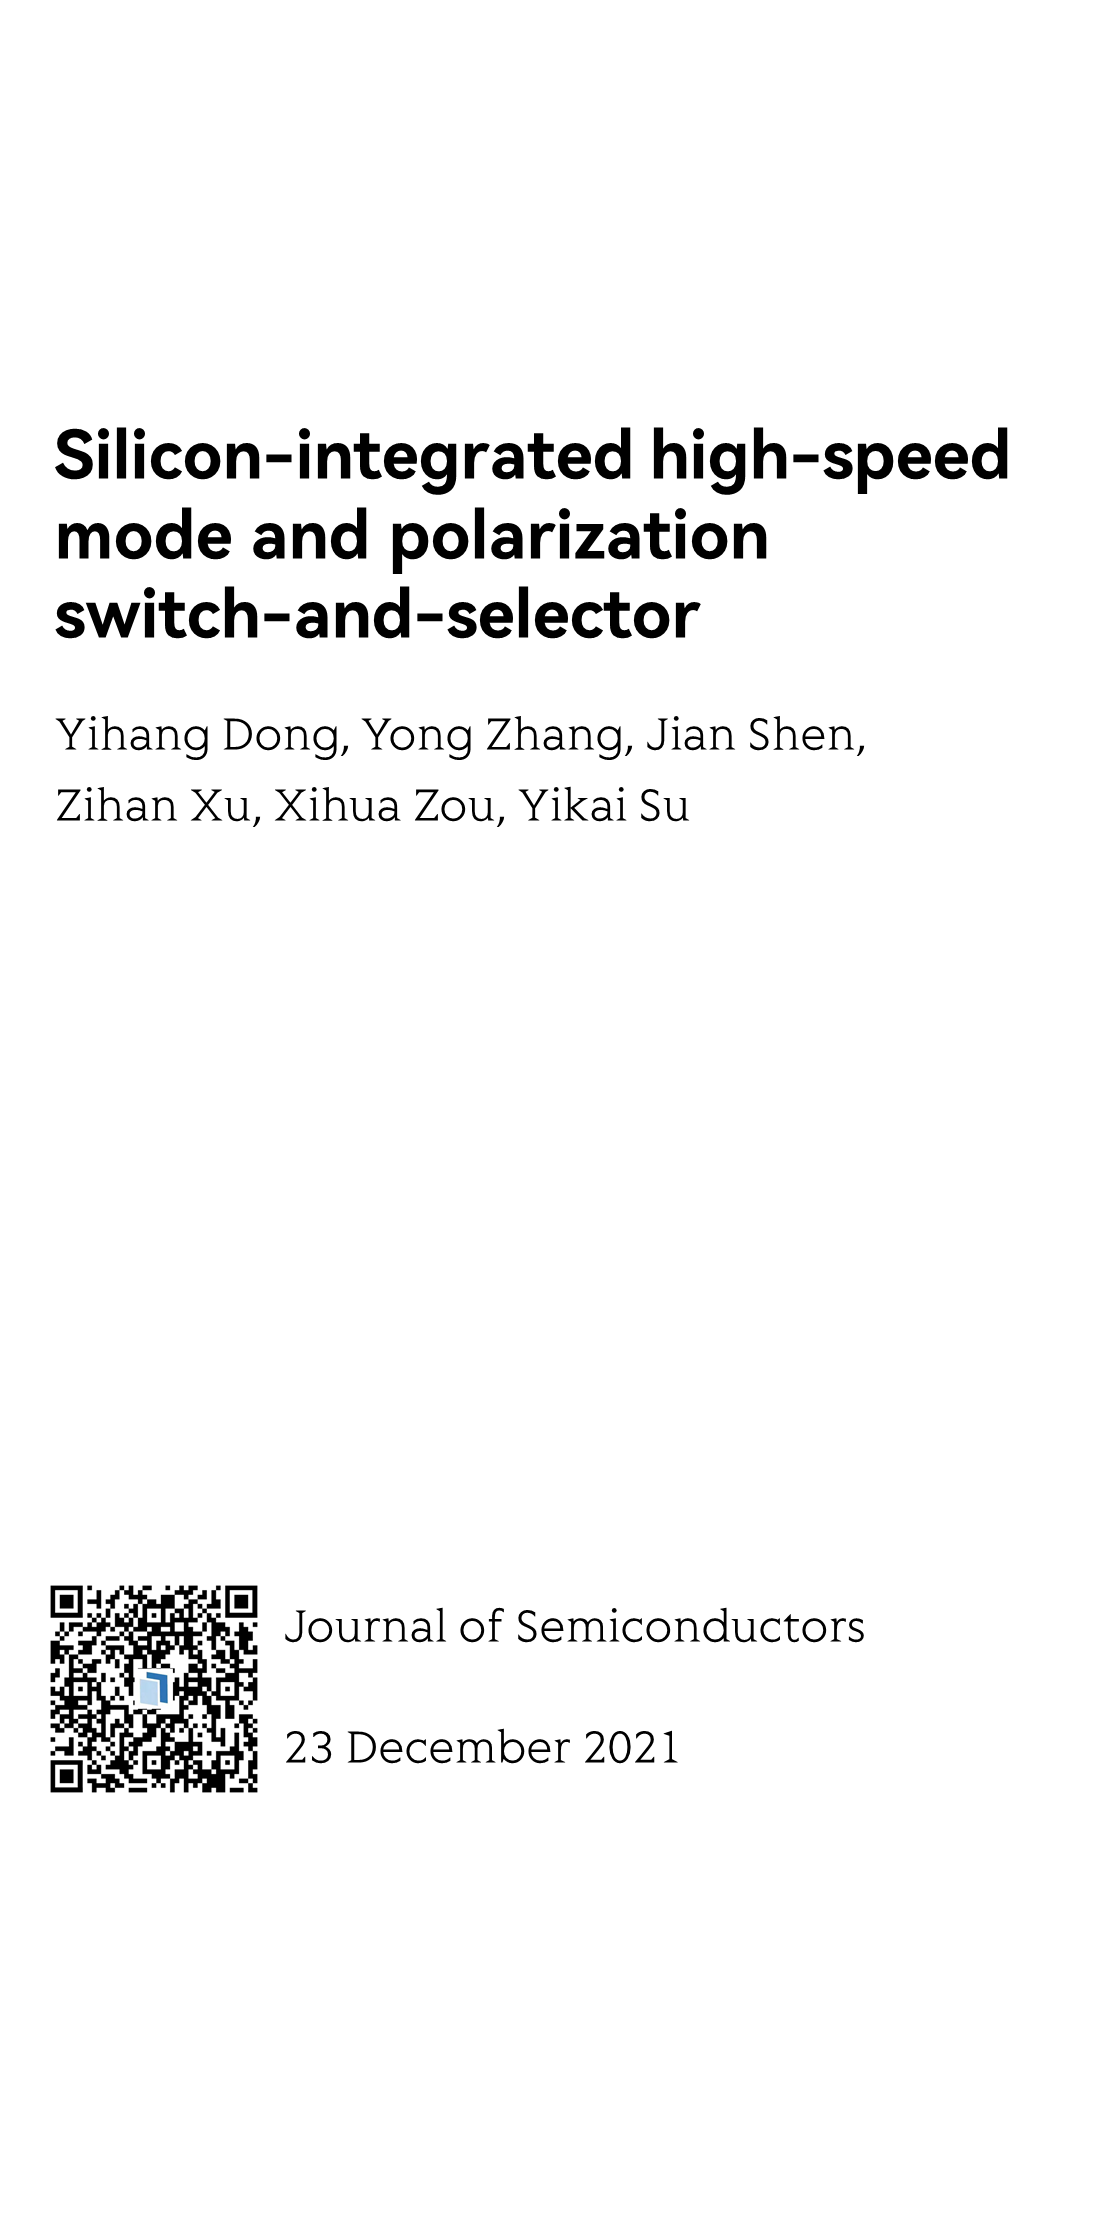 Silicon-integrated high-speed mode and polarization switch-and-selector_1